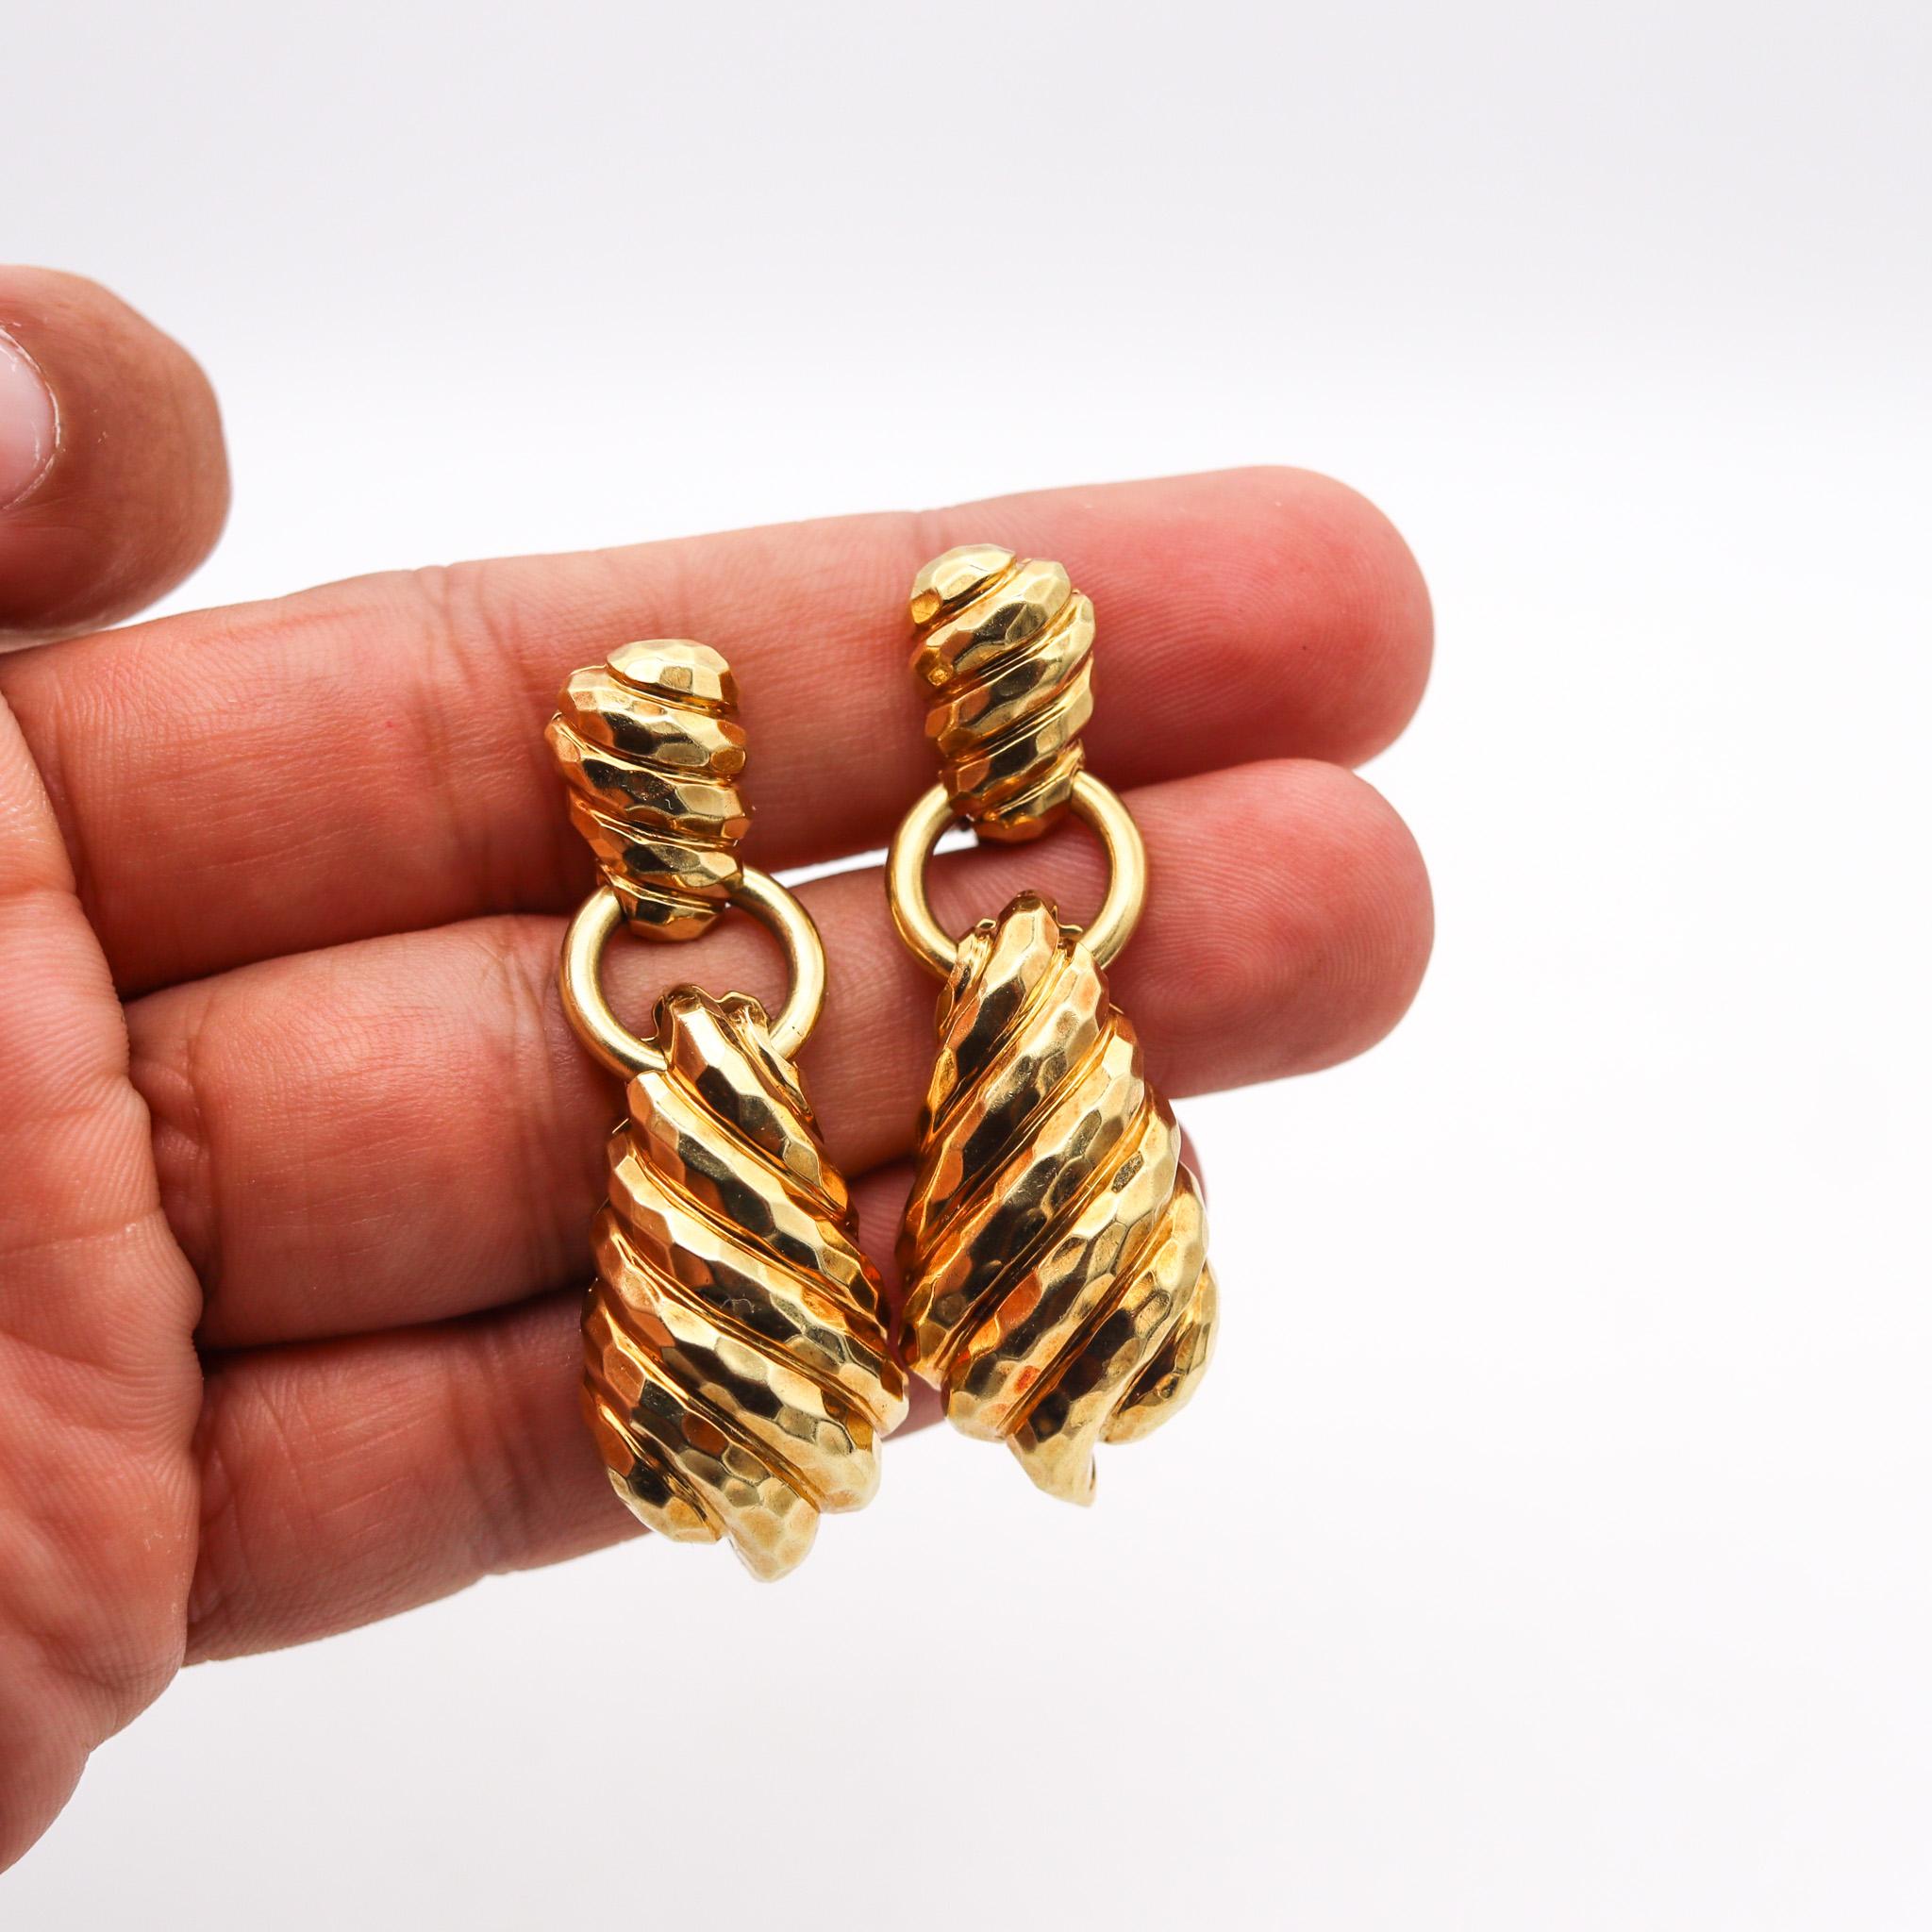 Dangle drop earrings designed by Henry Dunay.

Large pair of dangles drop earrings, created in New York city at the jewelry atelier of Henry Dunay, back in the 1990's. They were crafted with fluted shape, in solid rich yellow gold of 18 karats and